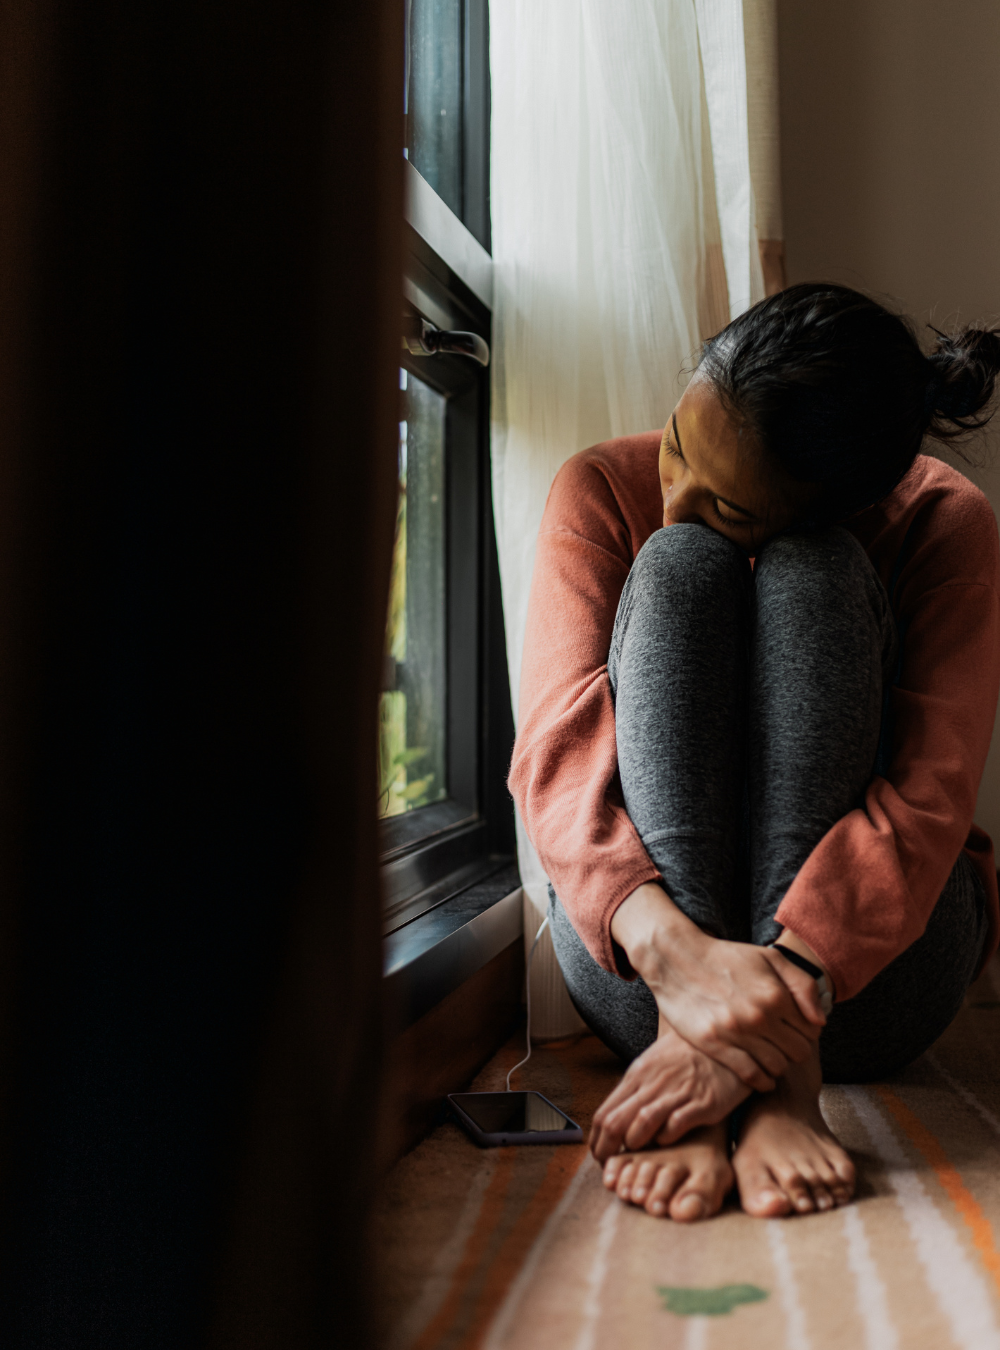 Major Depressive Episode Severity Among Adults From Marginalized Racial And Ethnic Backgrounds In The US